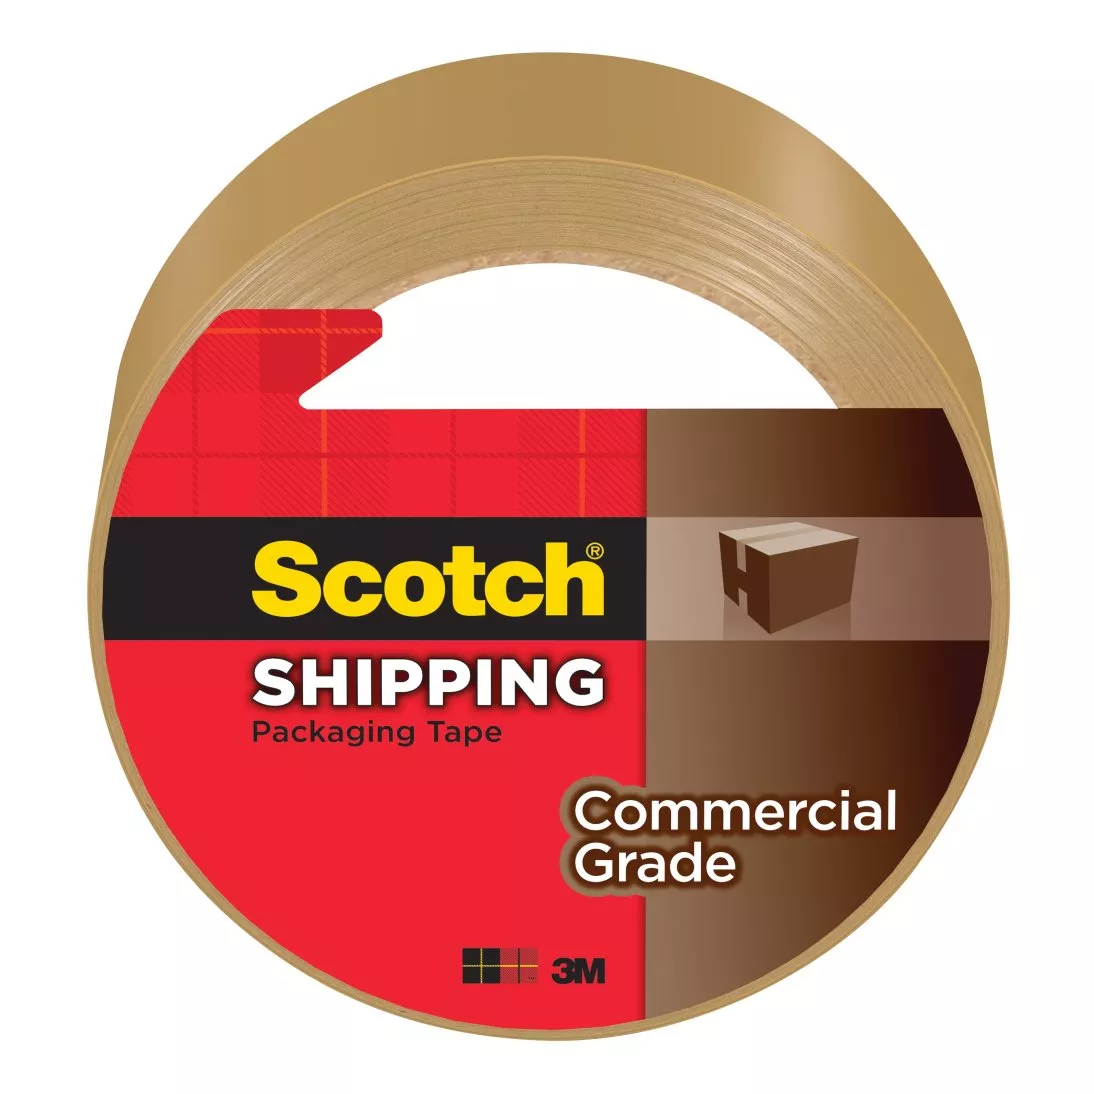 Scotch® Commercial Grade Shipping Packaging Tape 3750T, 1.88 in x 54.6
yd (48 mm x 50 m) Tan